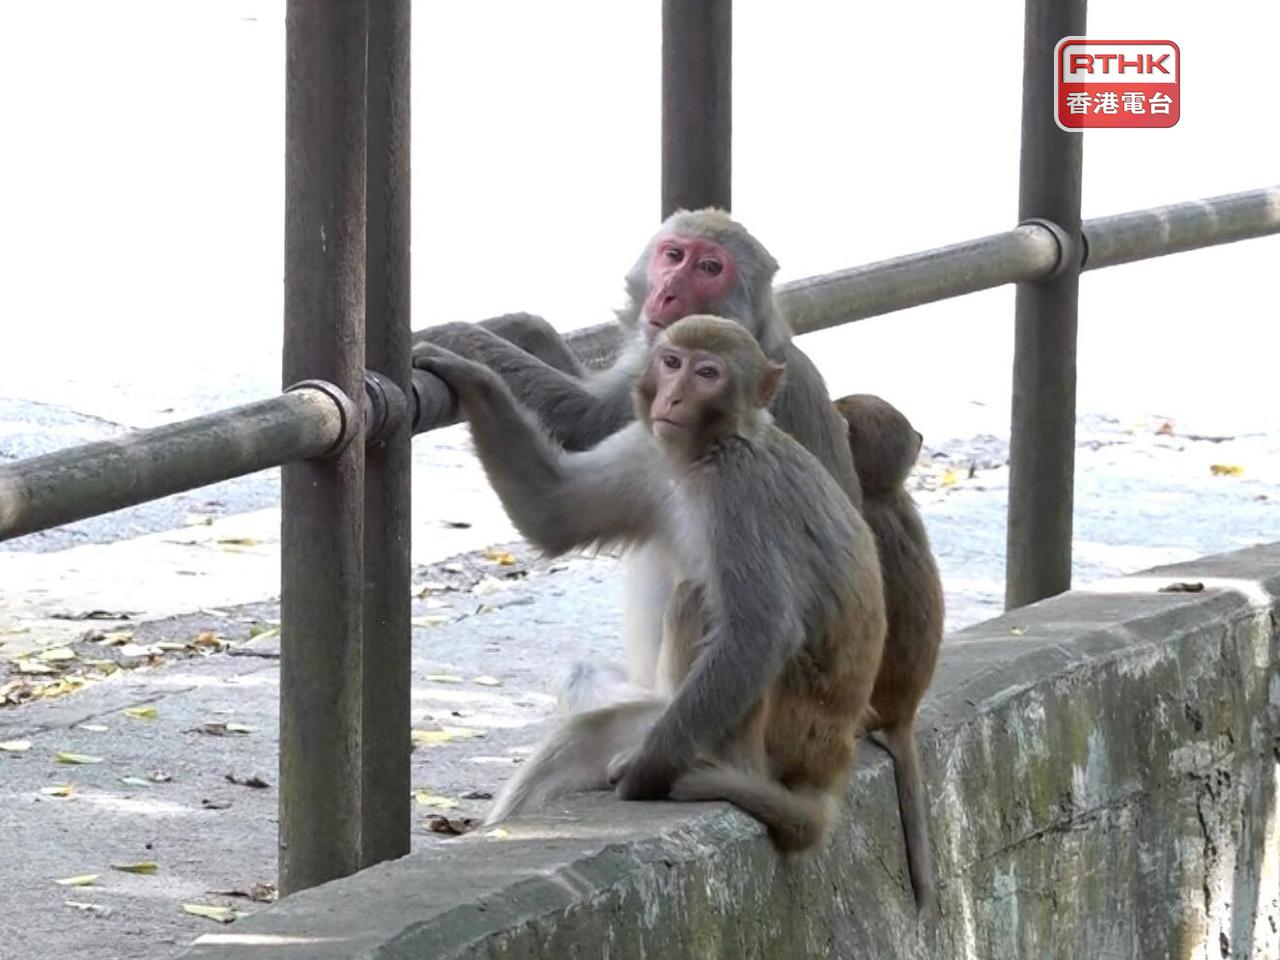 Don't feed monkeys or look them in the eye: AFCD